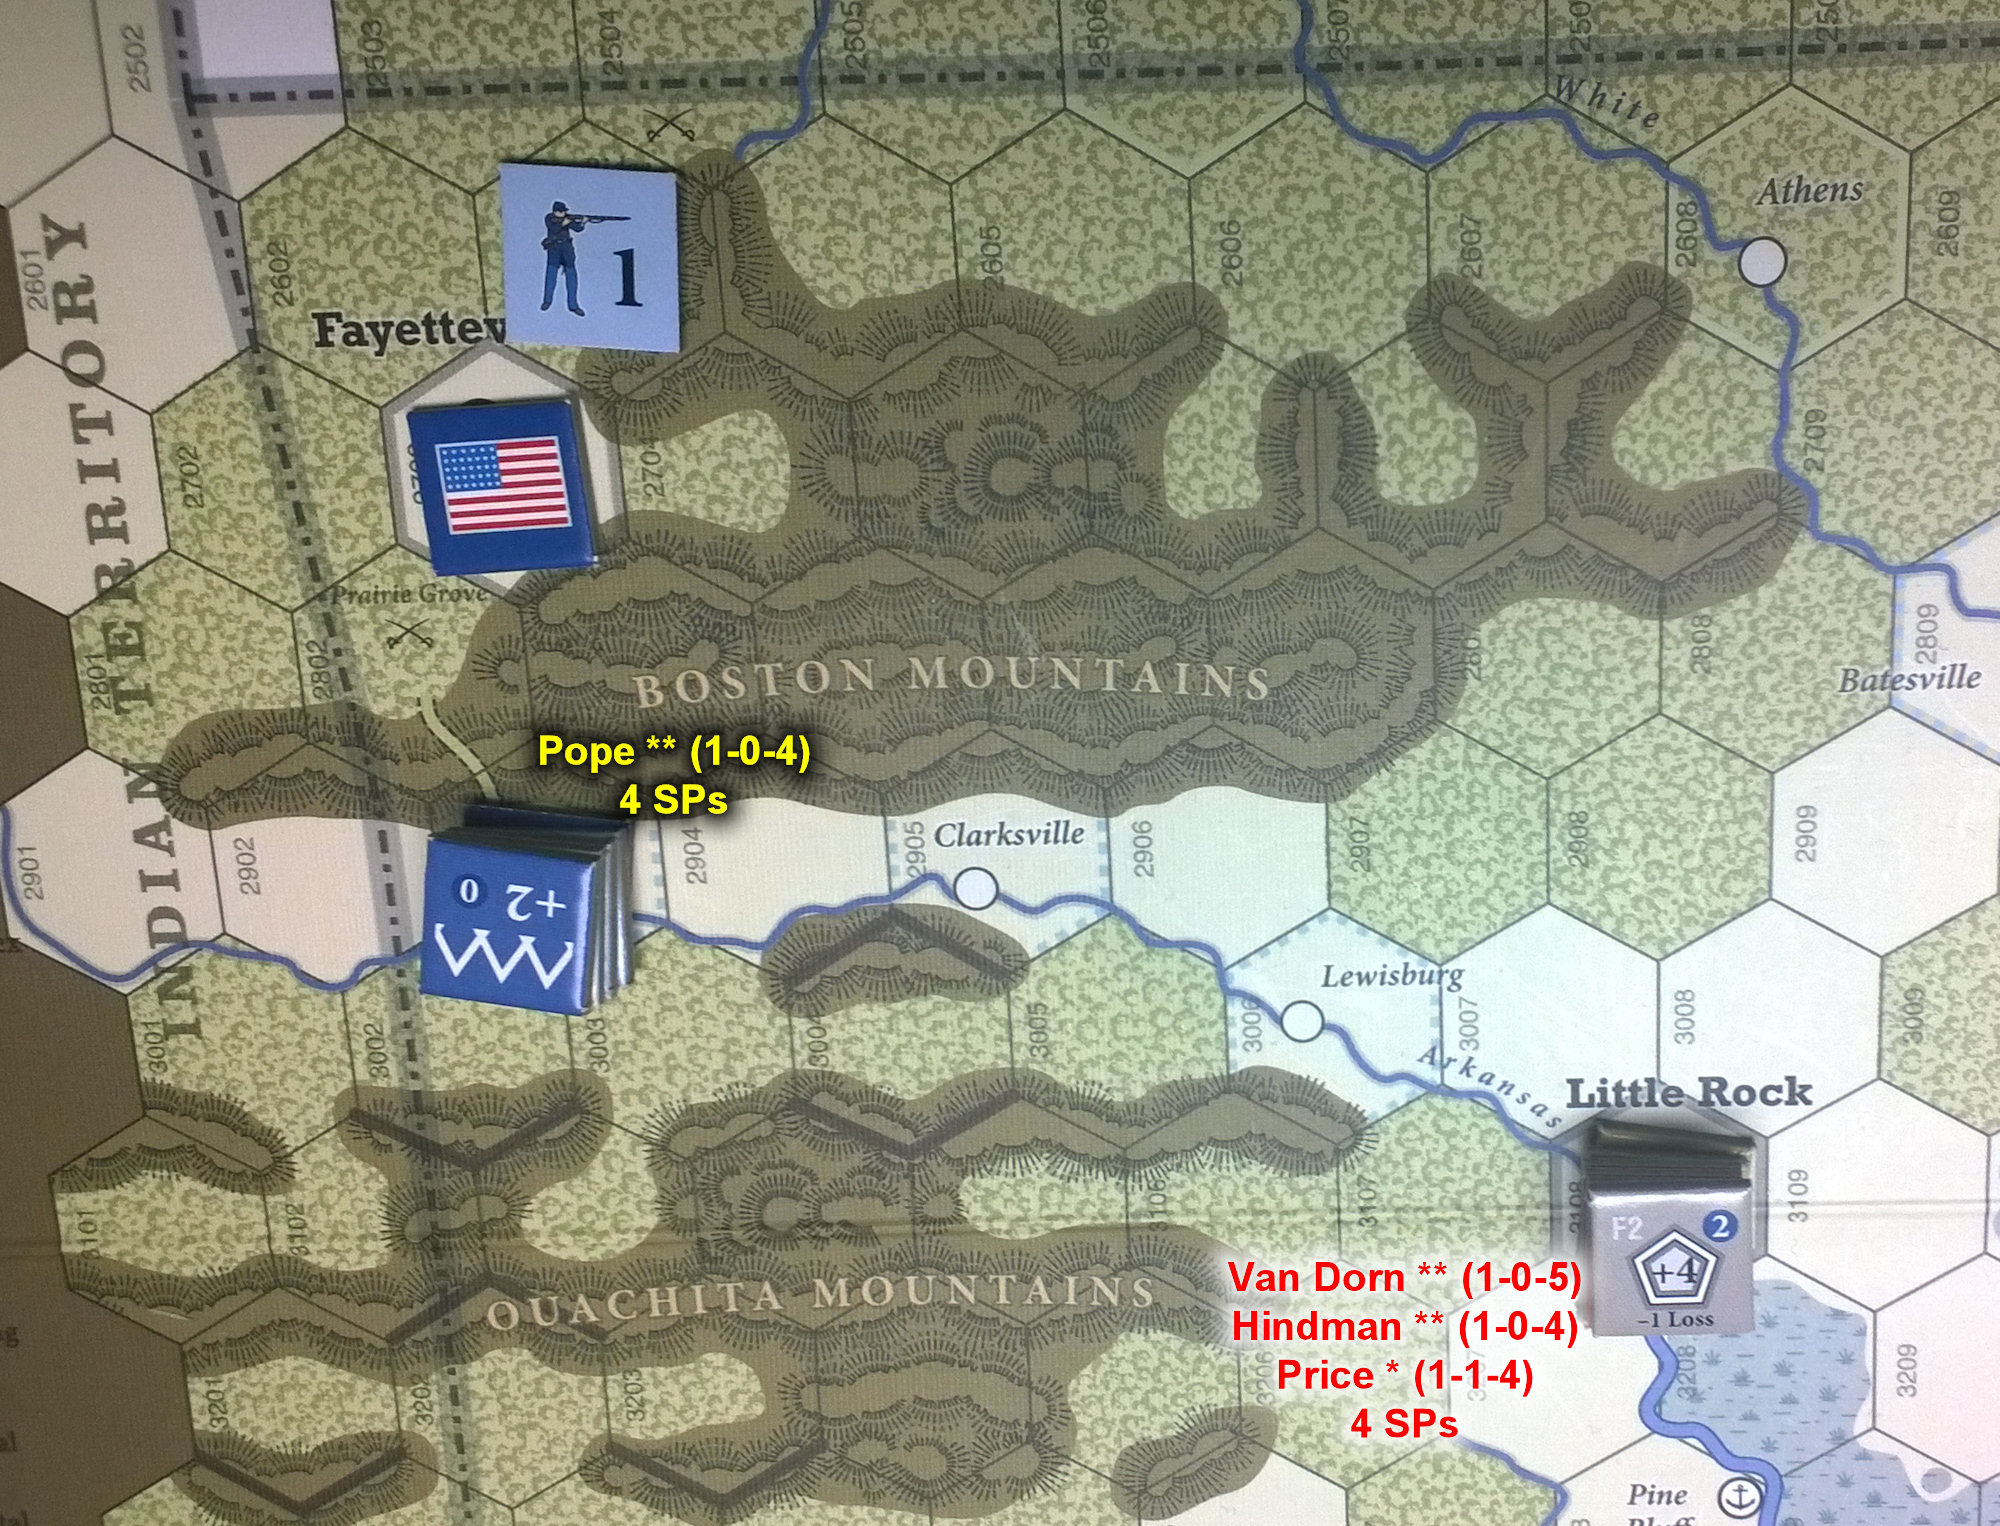 The U.S. Civil War: Trans-Mississippi Theater at the end of Game Turn 5